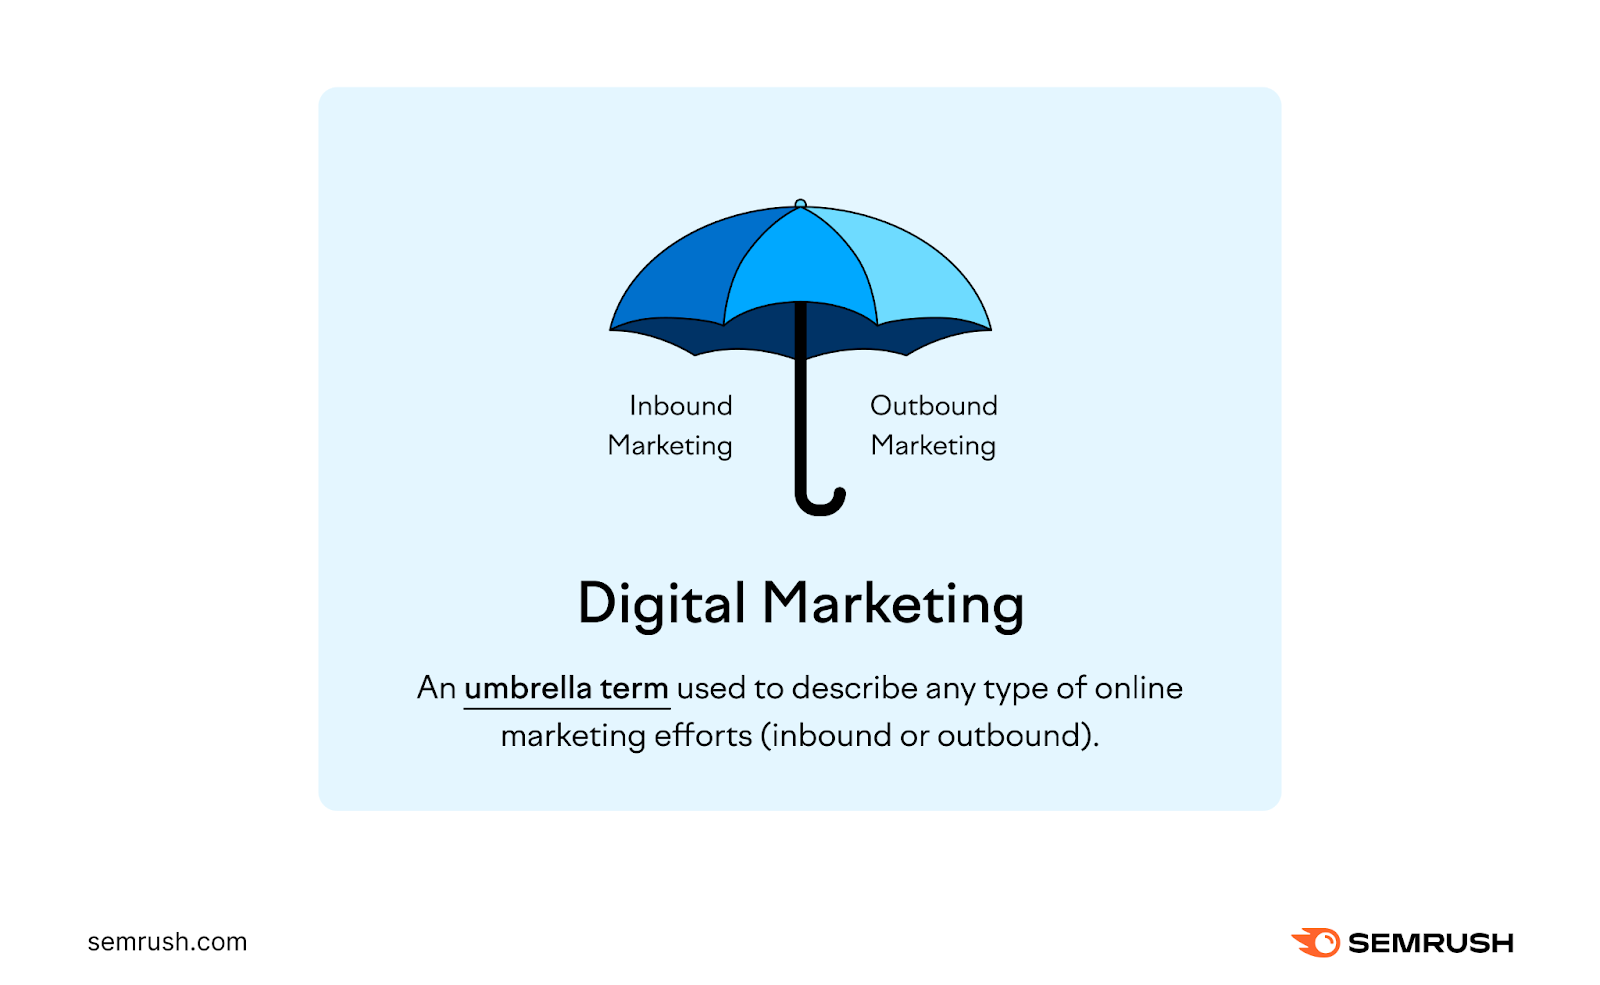 A visual showing digital marketing as an umbrella term for inbound and outbound marketing